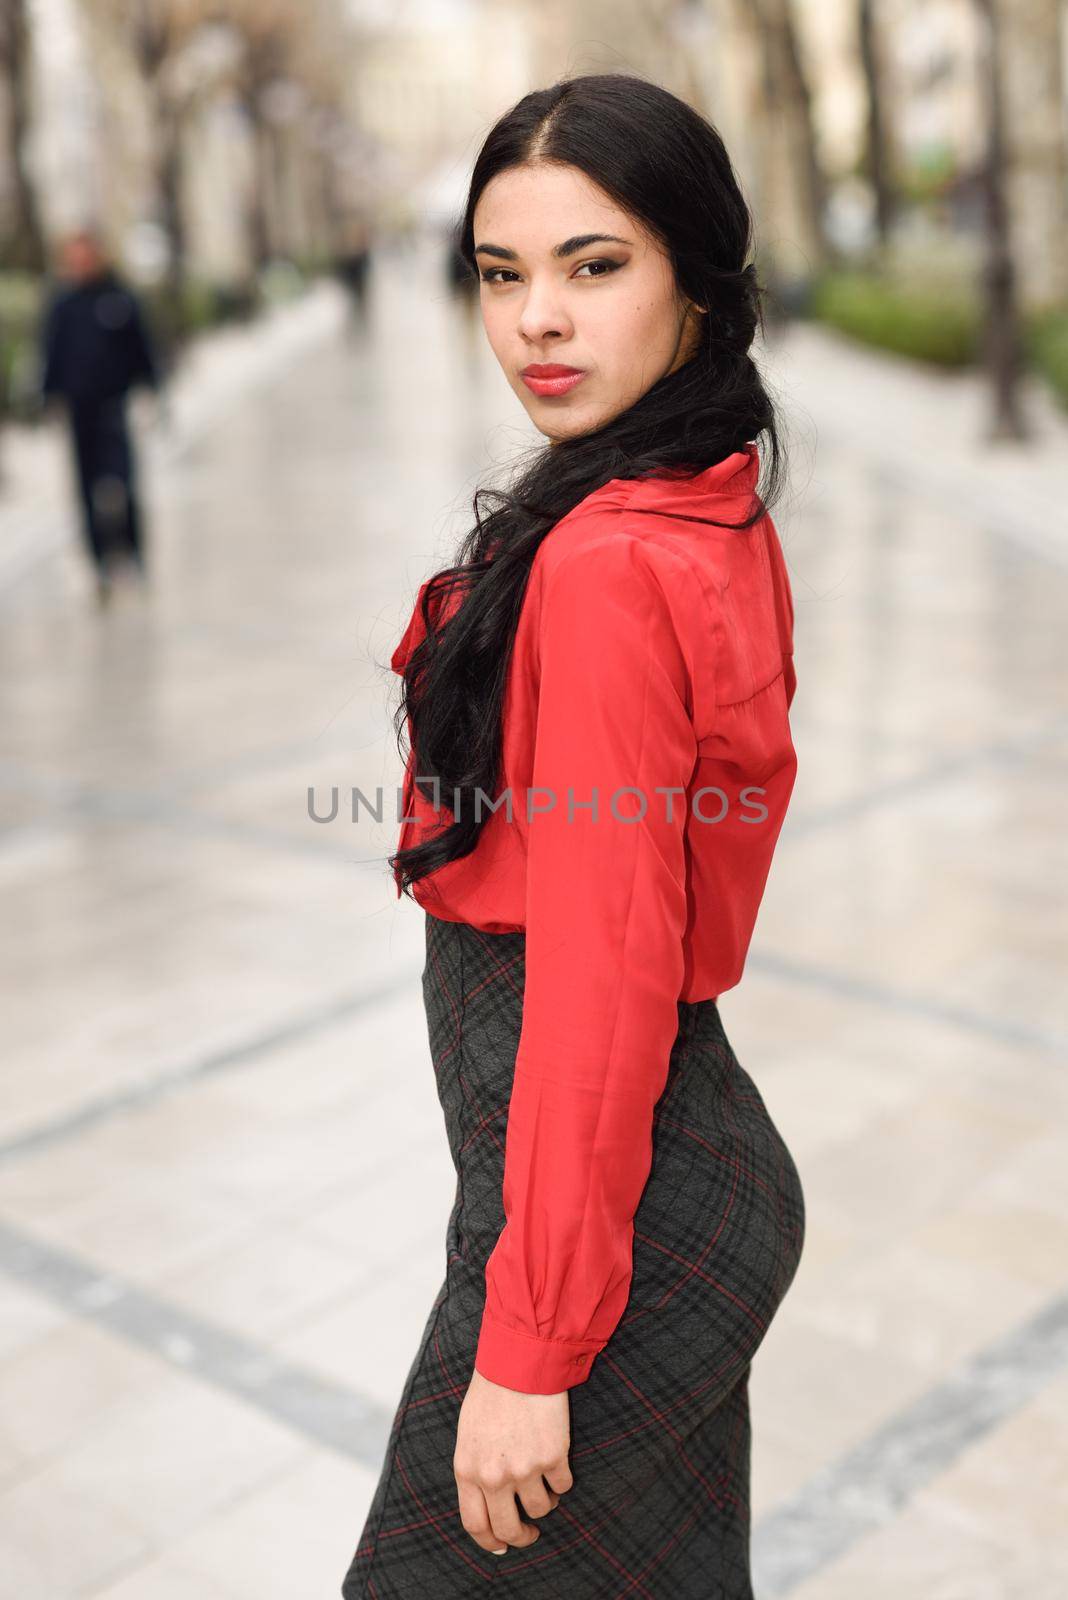 Portrait of hispanic businesswoman in urban background wearing red shirt and skirt